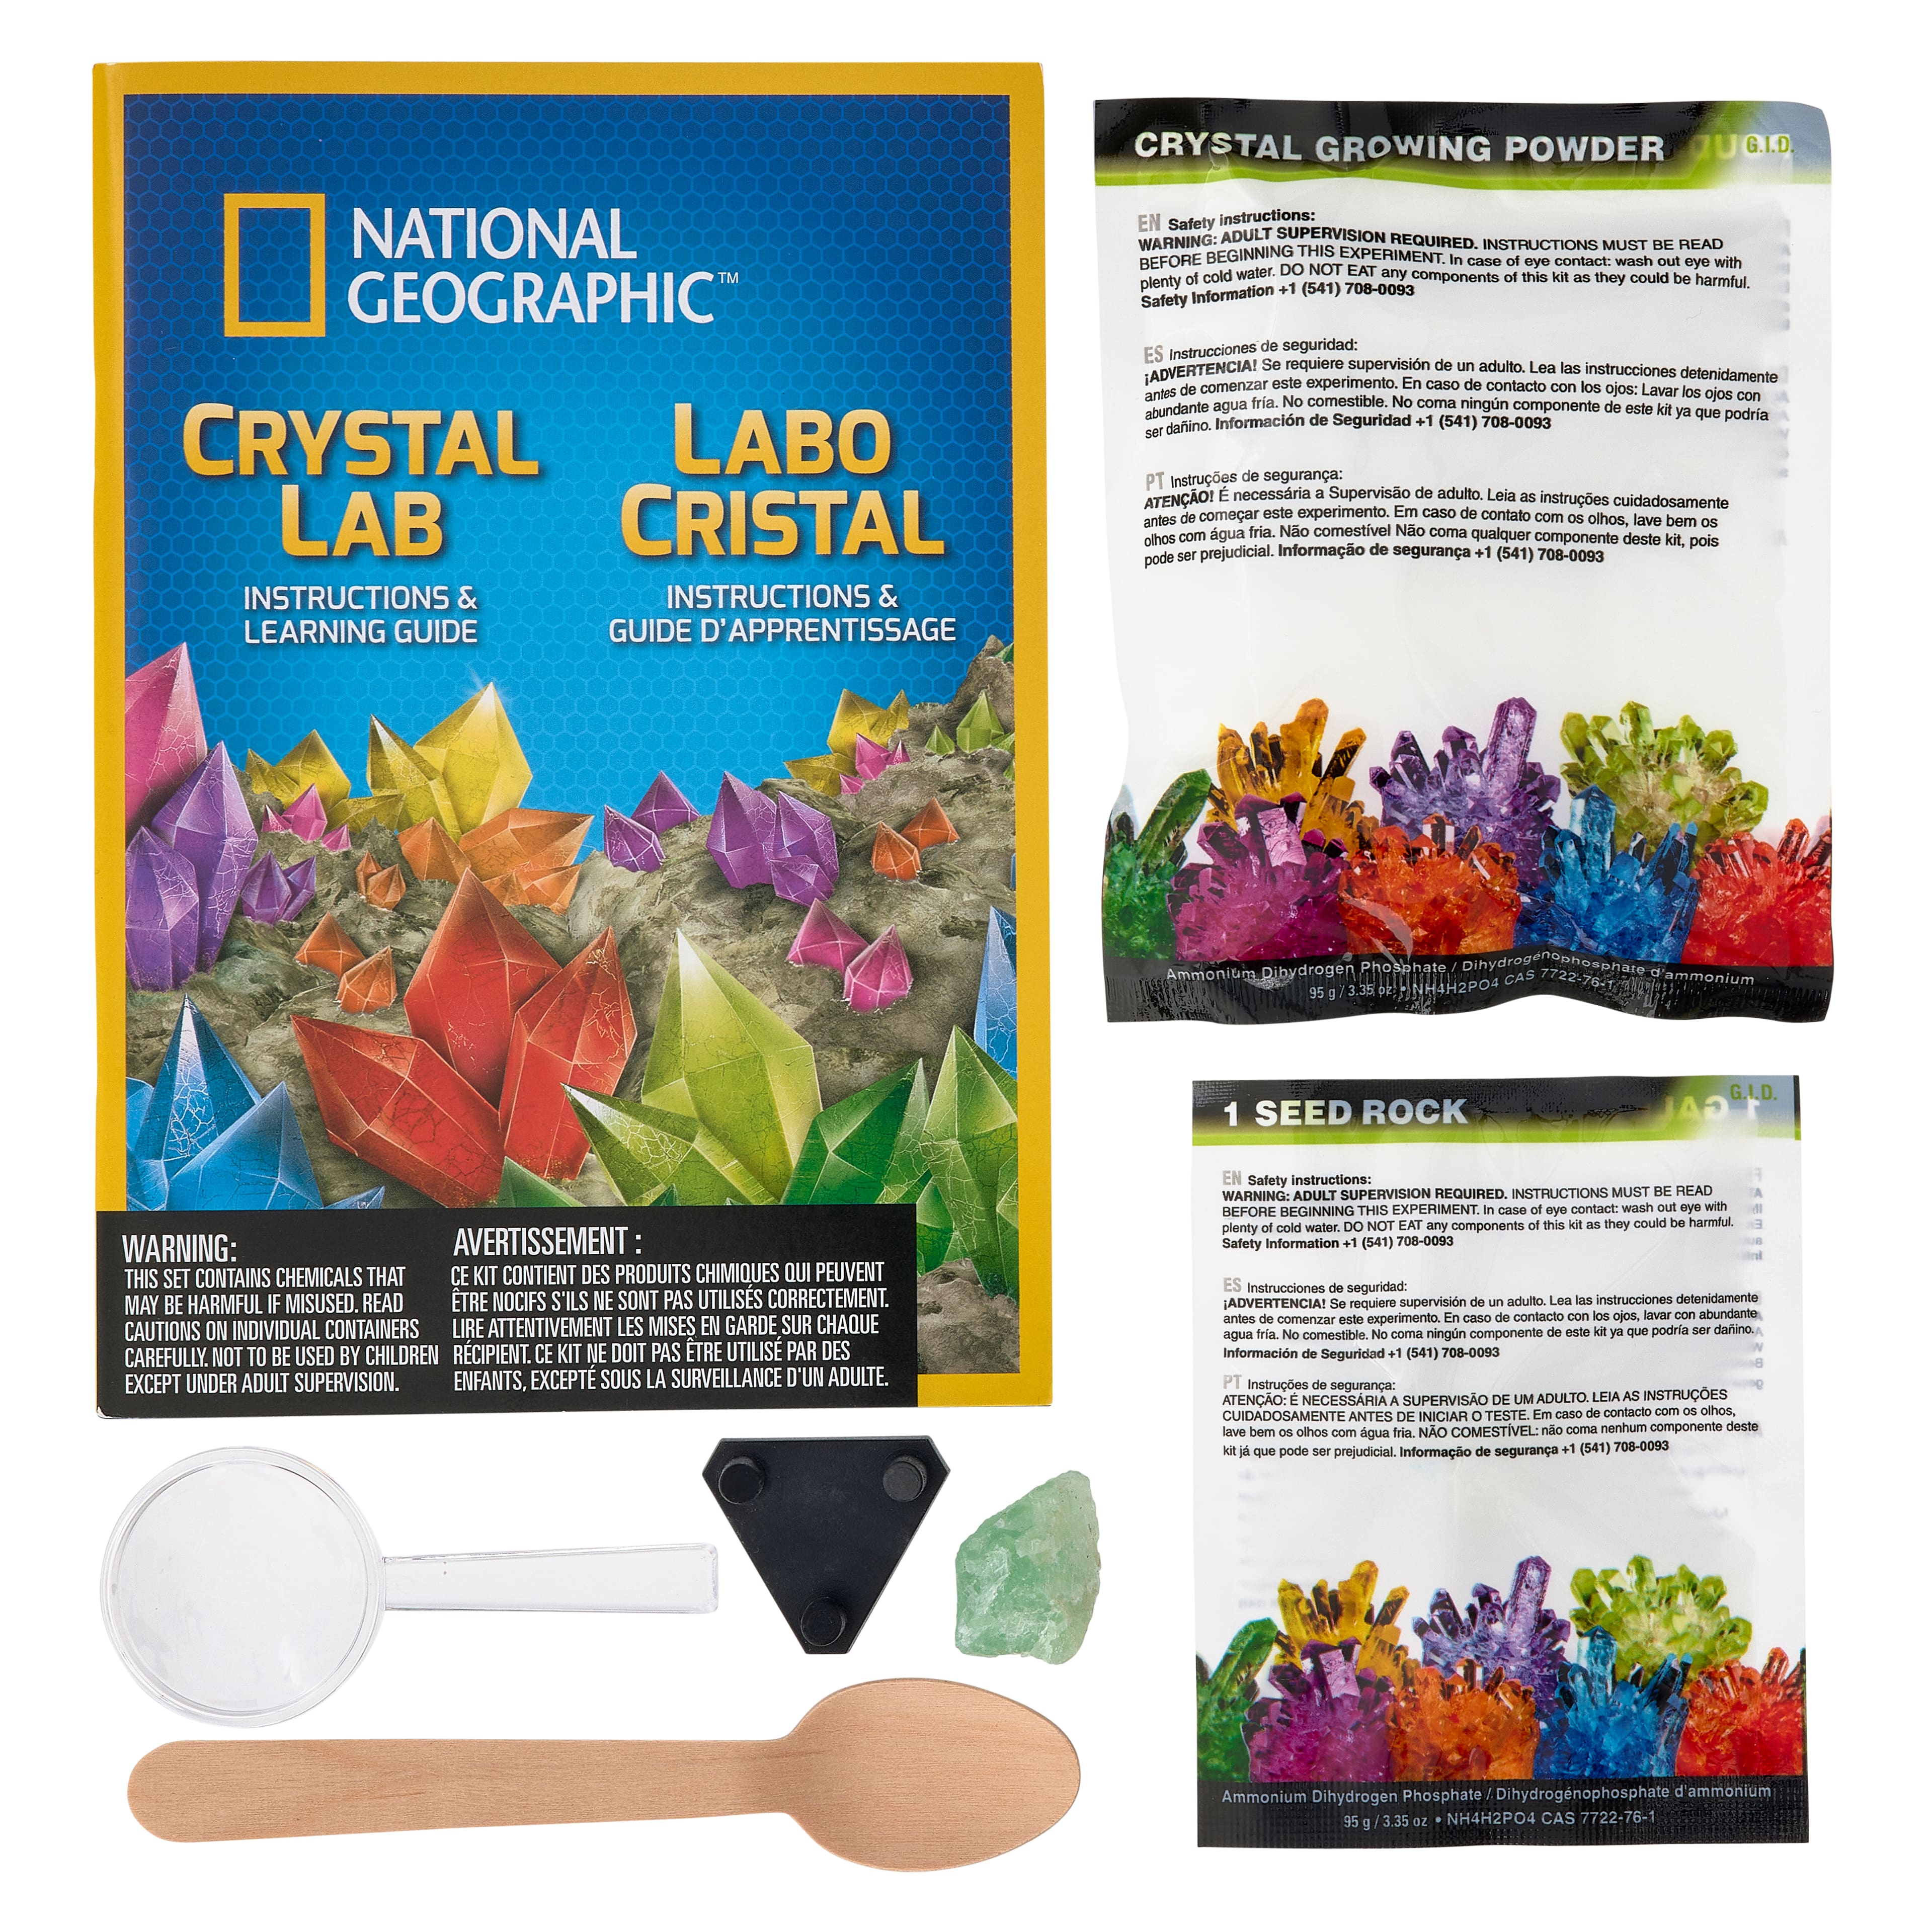 8 Pack: National Geographic&#x2122; Glow-In-The-Dark Crystal Lab